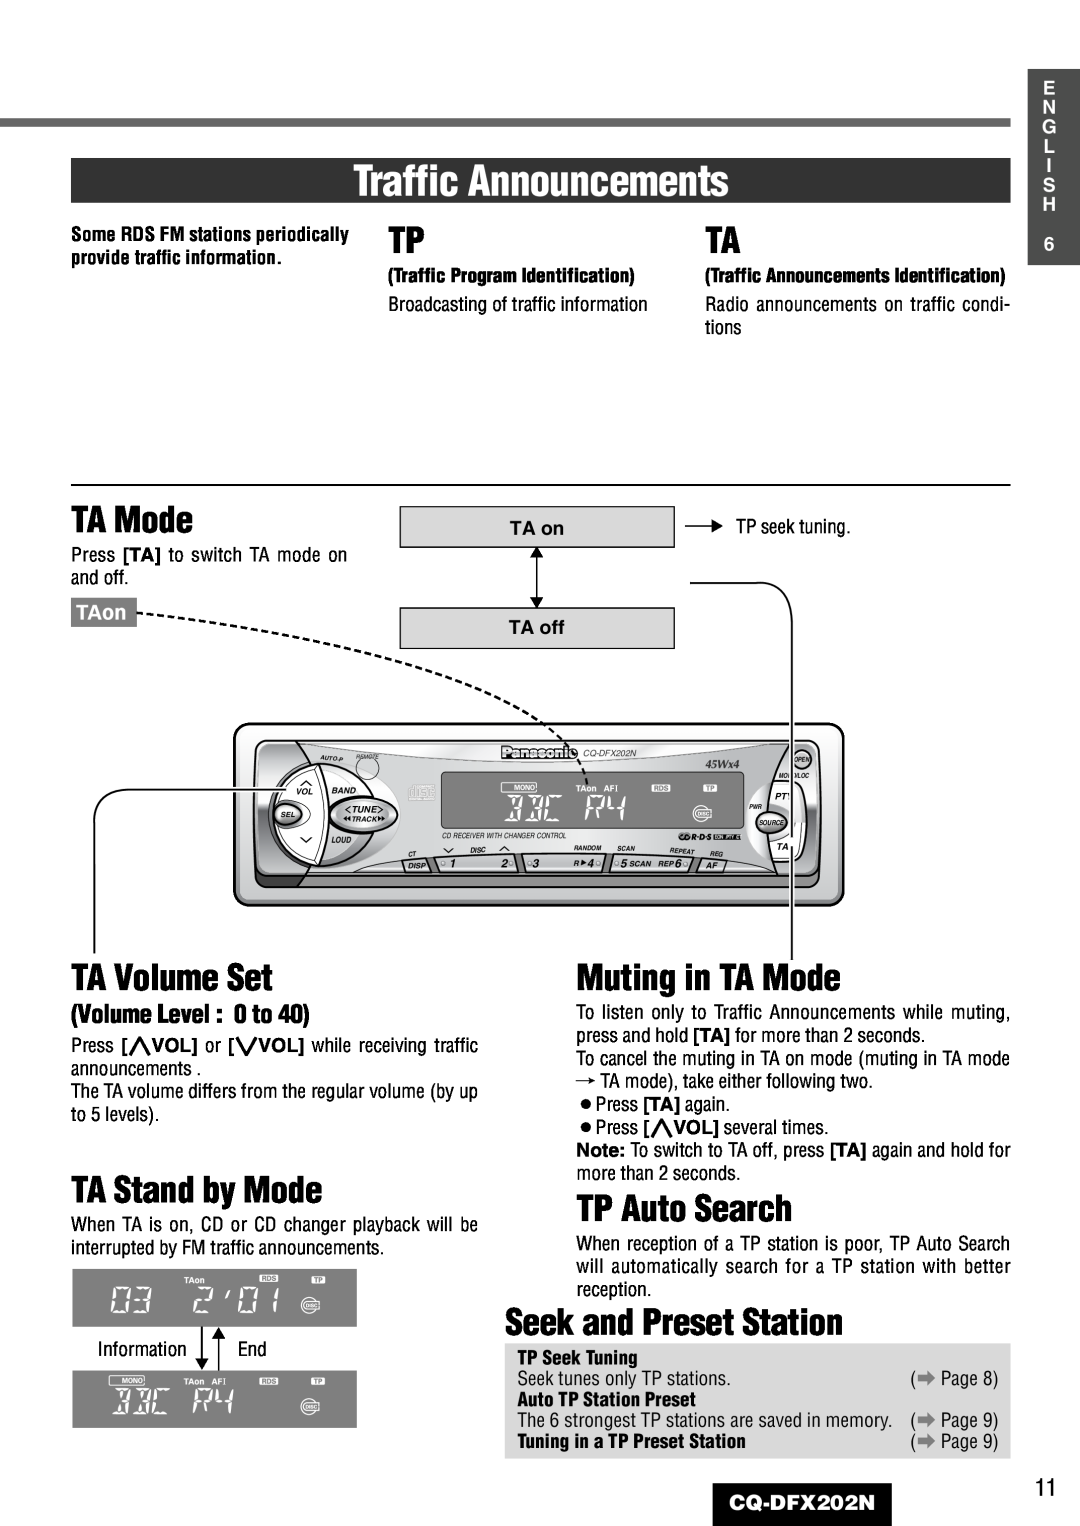 Panasonic CQ-DFX202N Traffic Announcements, TA Volume Set, TA Stand by Mode, Muting in TA Mode, TP Auto Search, tions 